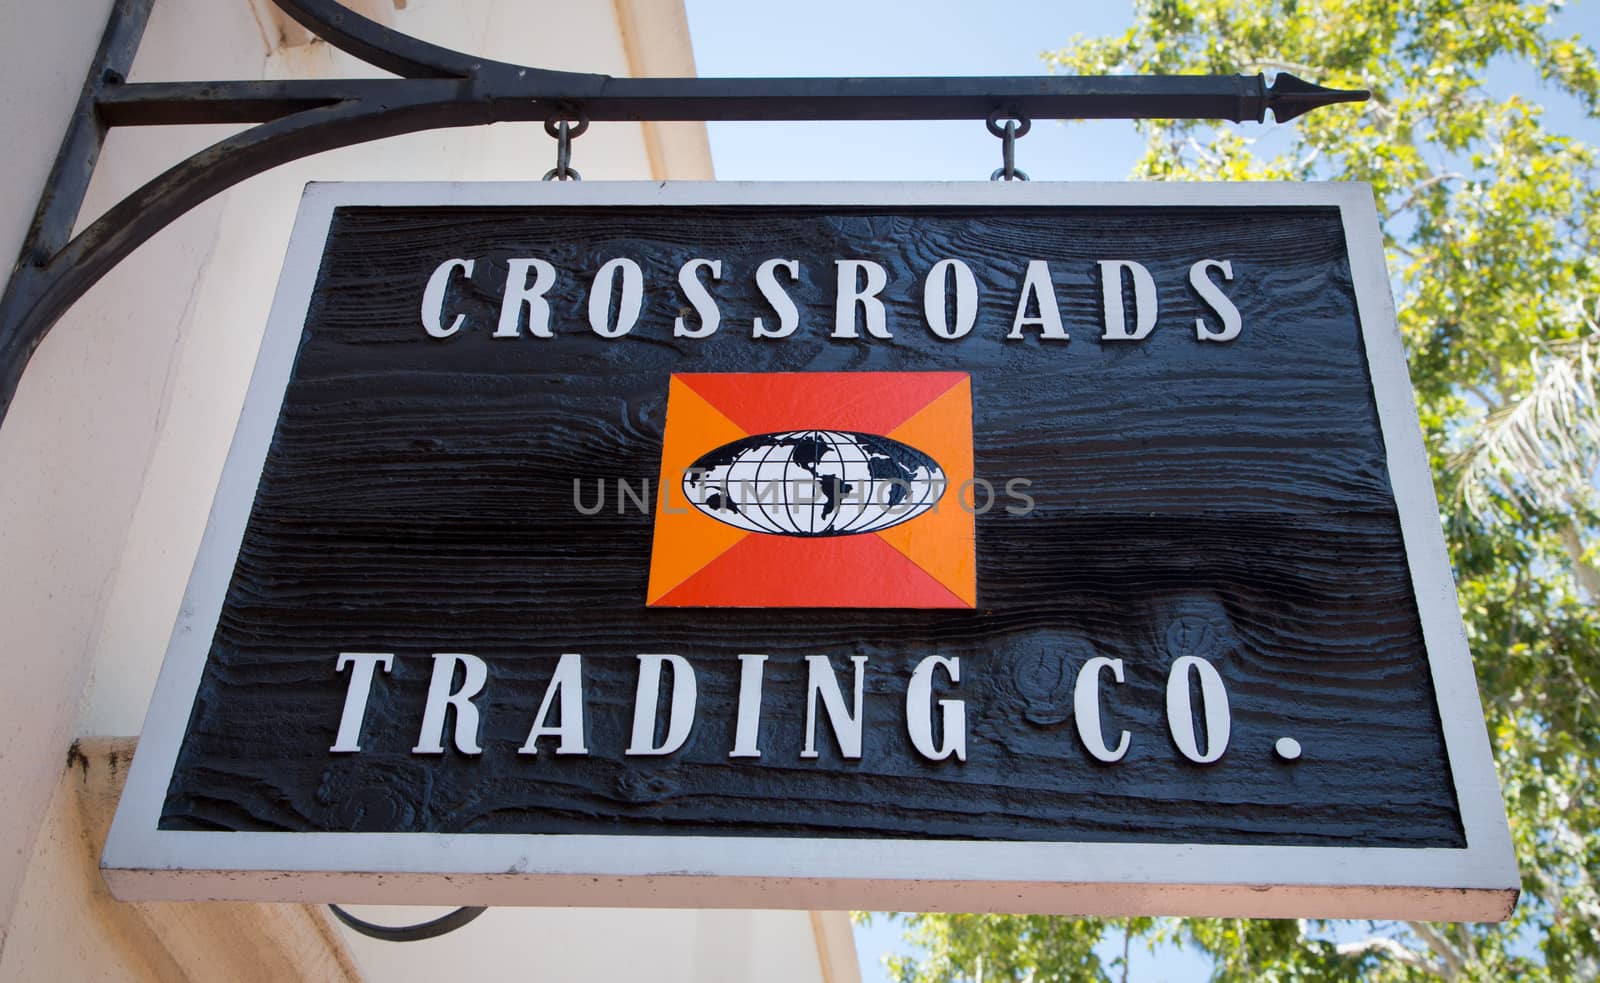 SANTA BARBARA, CA/USA - APRIL 30, 2016: Crossroads Trading Company exterior and sign. Crossroads Trading is a clothing store specializing in up scale used clothing and accessories.